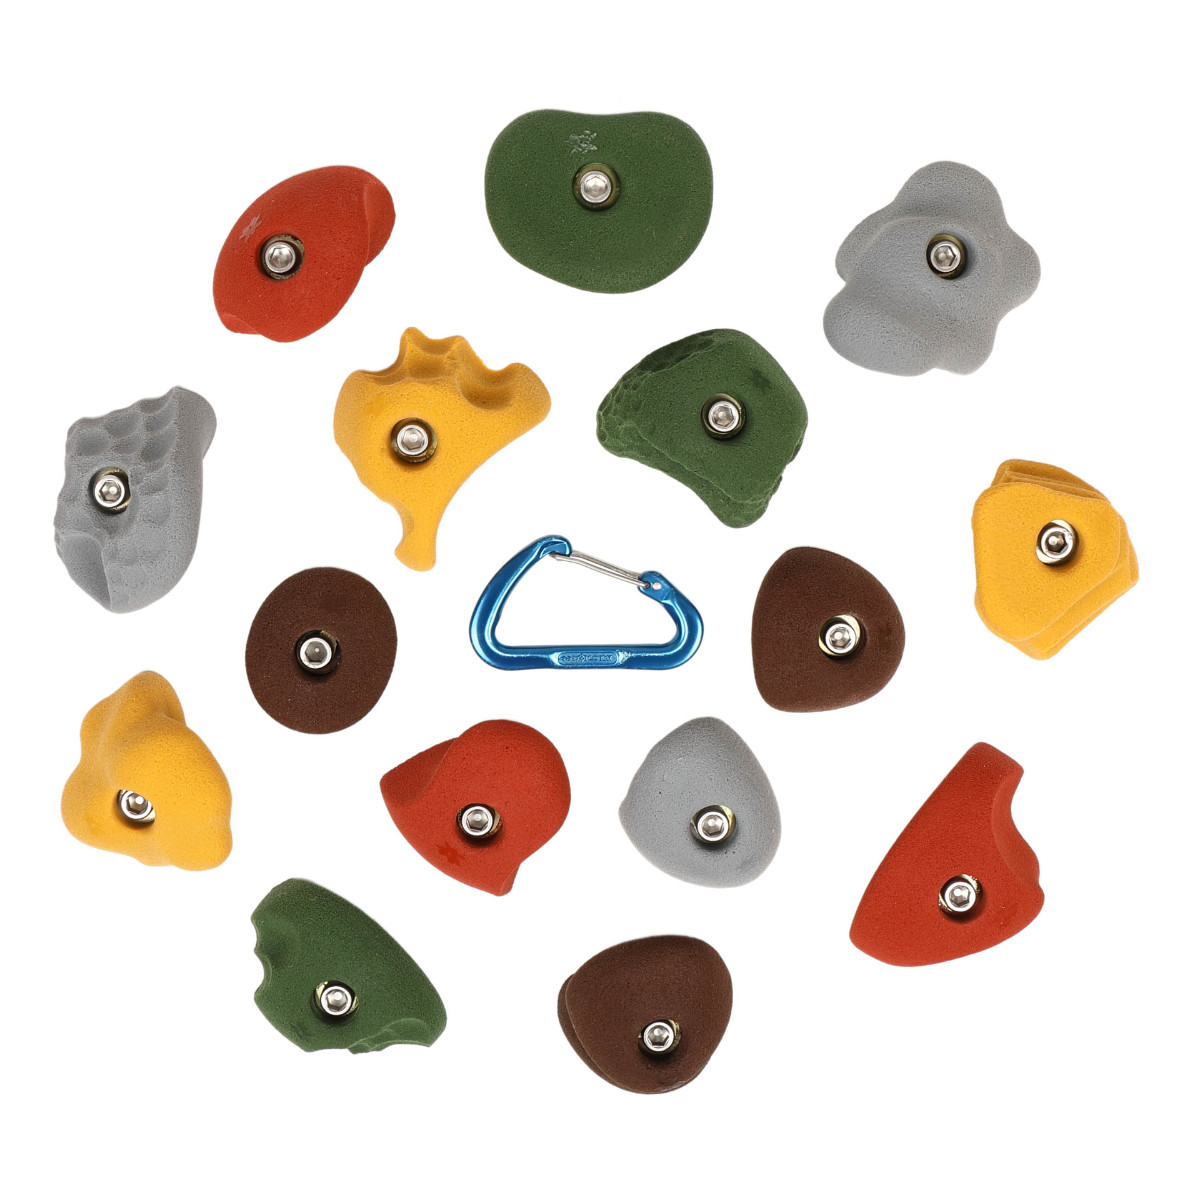 24 Rock-Like l Climbing Holds l Mixed Earth Tones 